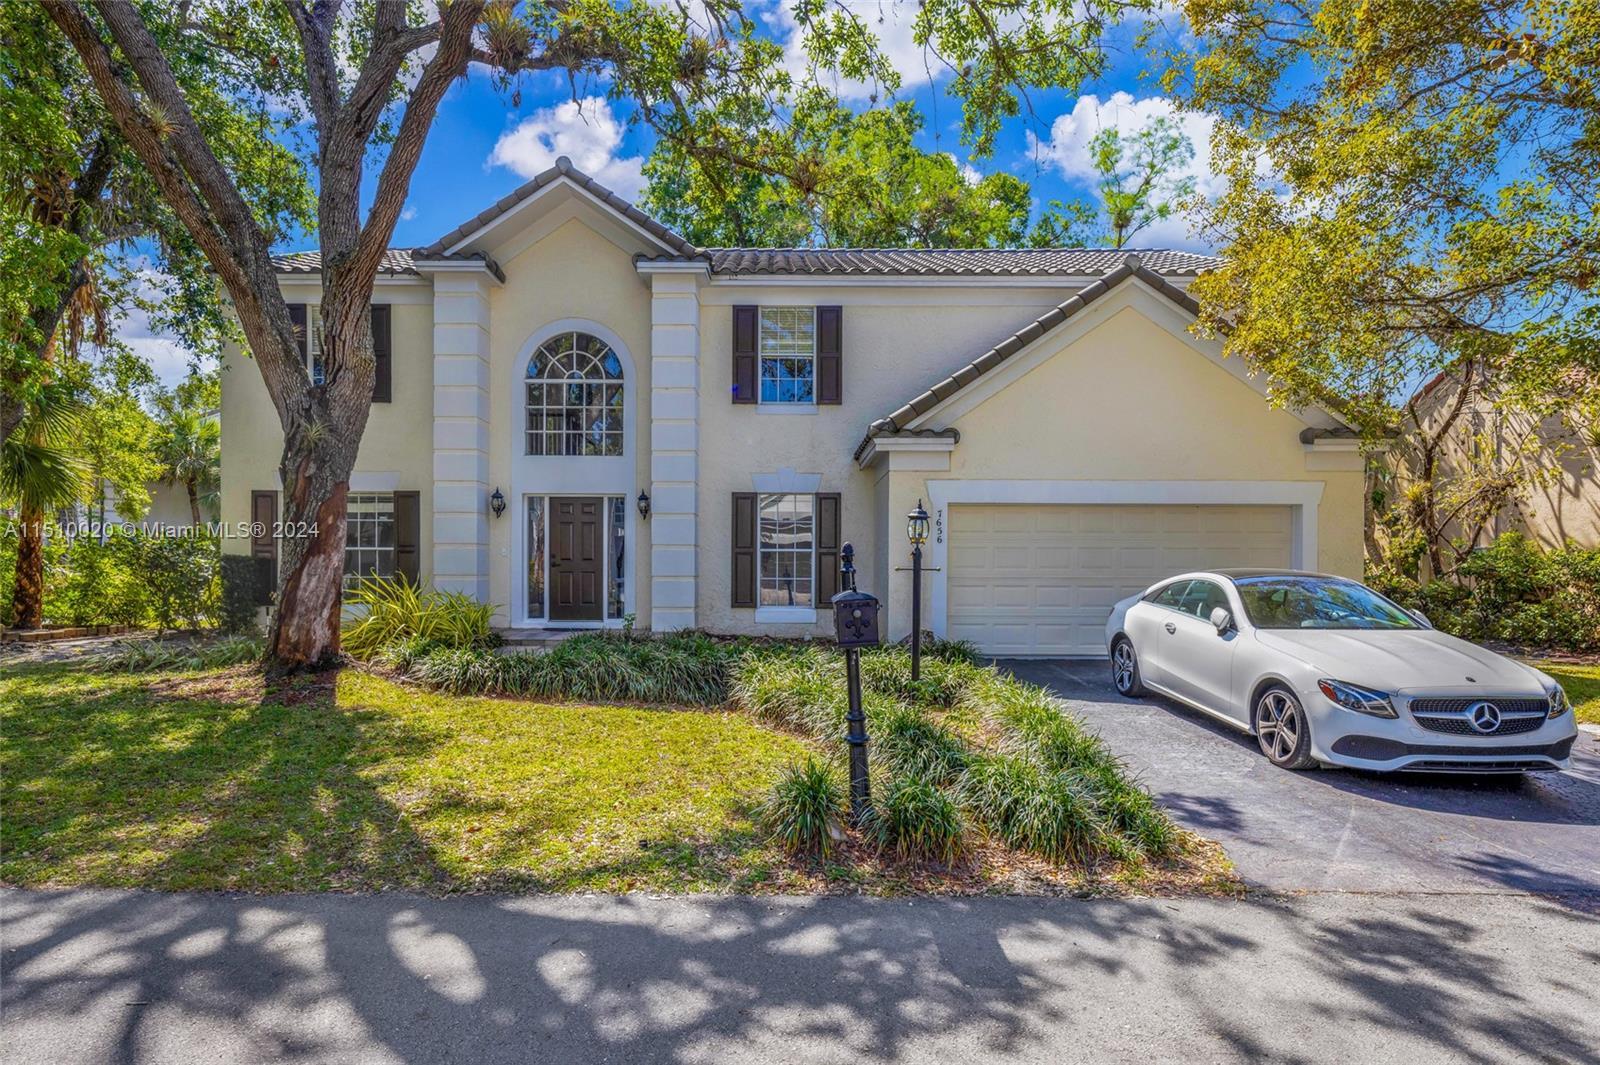 Photo of 7656 Parkview Wy in Coral Springs, FL